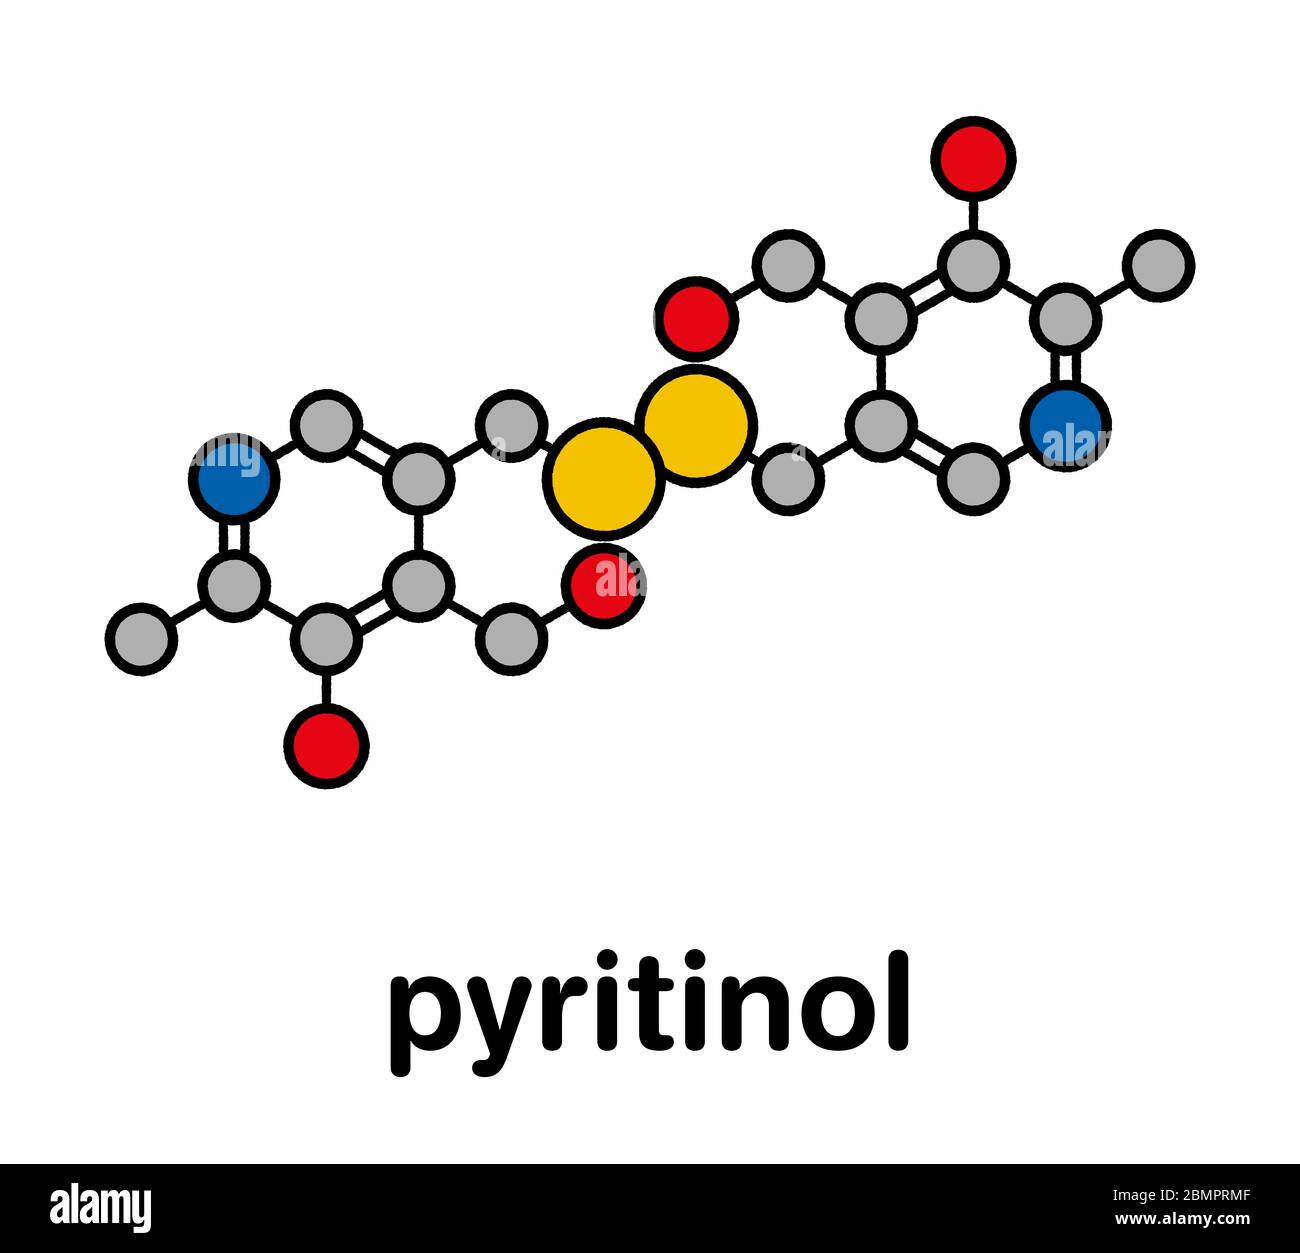 Pyritinol (pyridoxine disulfide) cognitive and learning disorder drug molecule. Also used in nootropic dietary supplements. Stylized skeletal formula (chemical structure): Atoms are shown as color-coded circles: hydrogen (hidden), carbon (grey), oxygen (red), nitrogen (blue), sulfur (yellow). Stock Photo